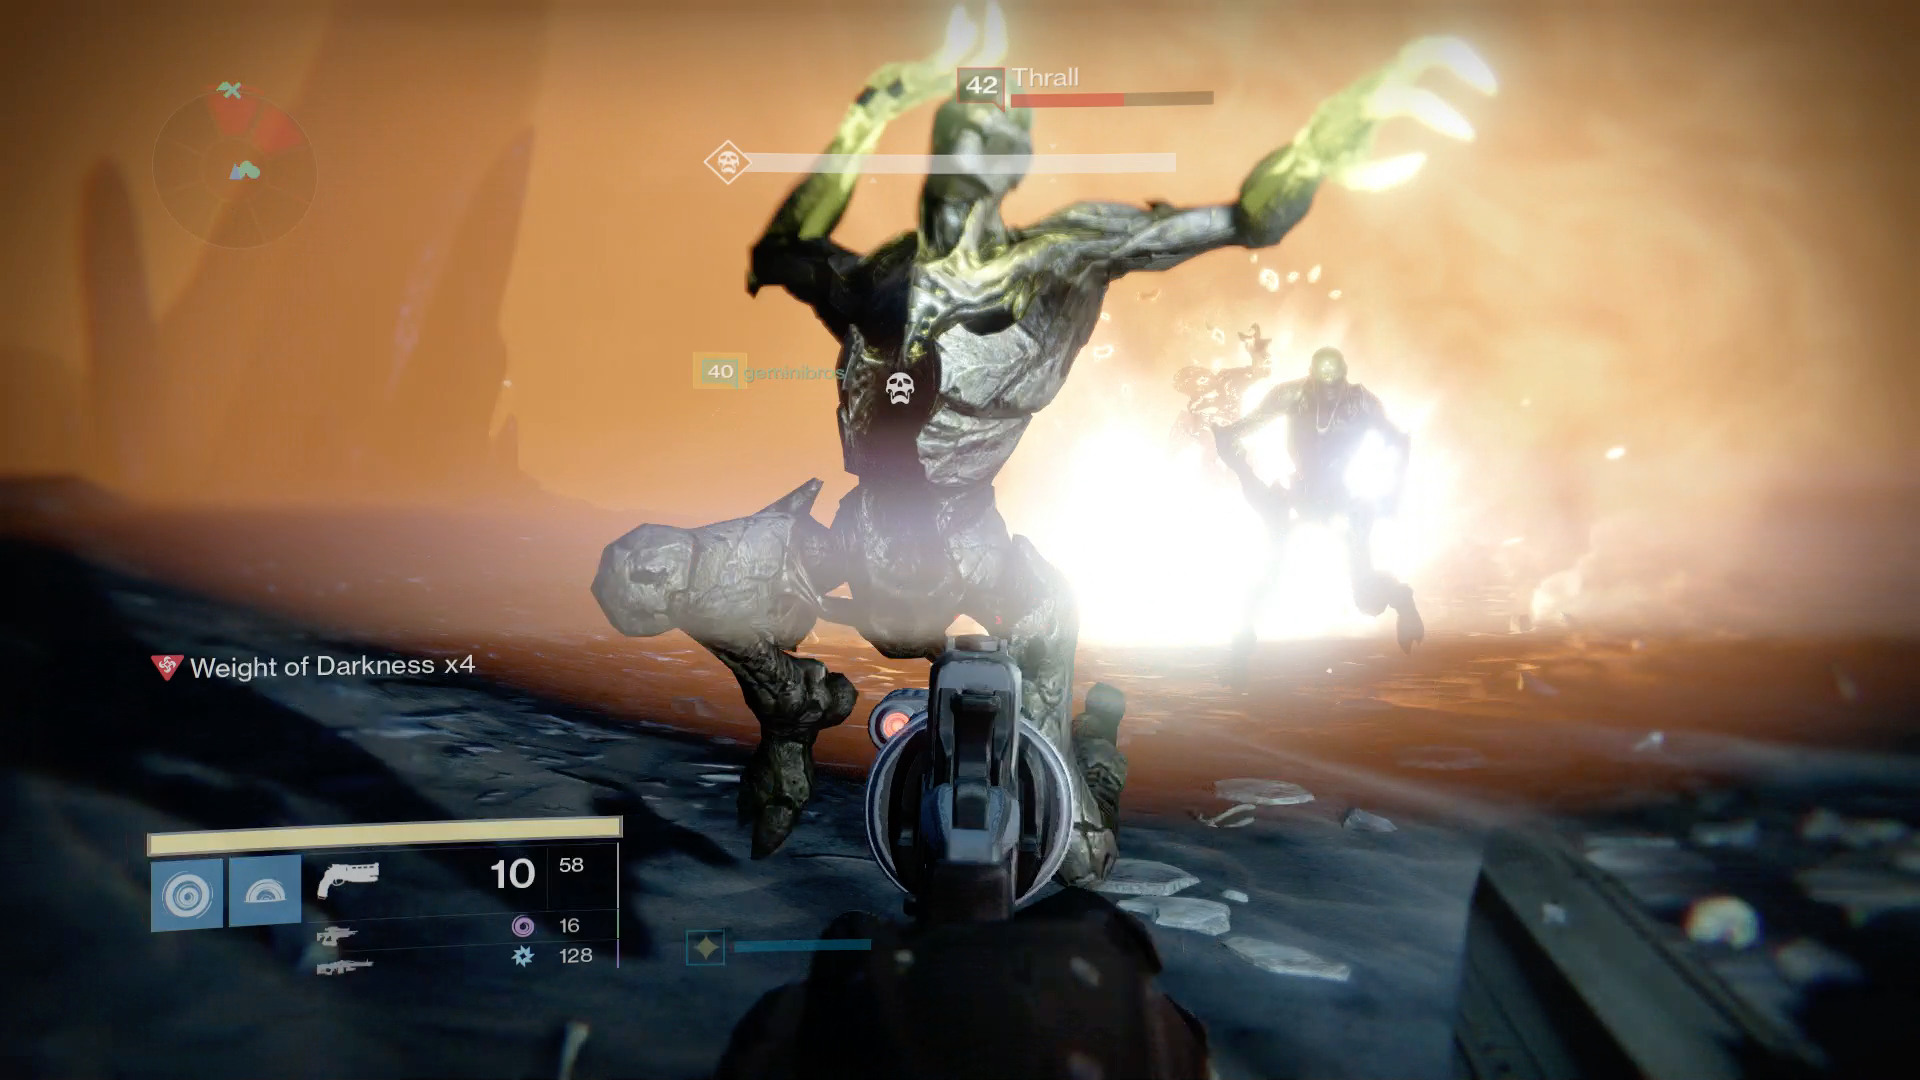 5 Thoughts After Playing Destiny For The First Time In Months